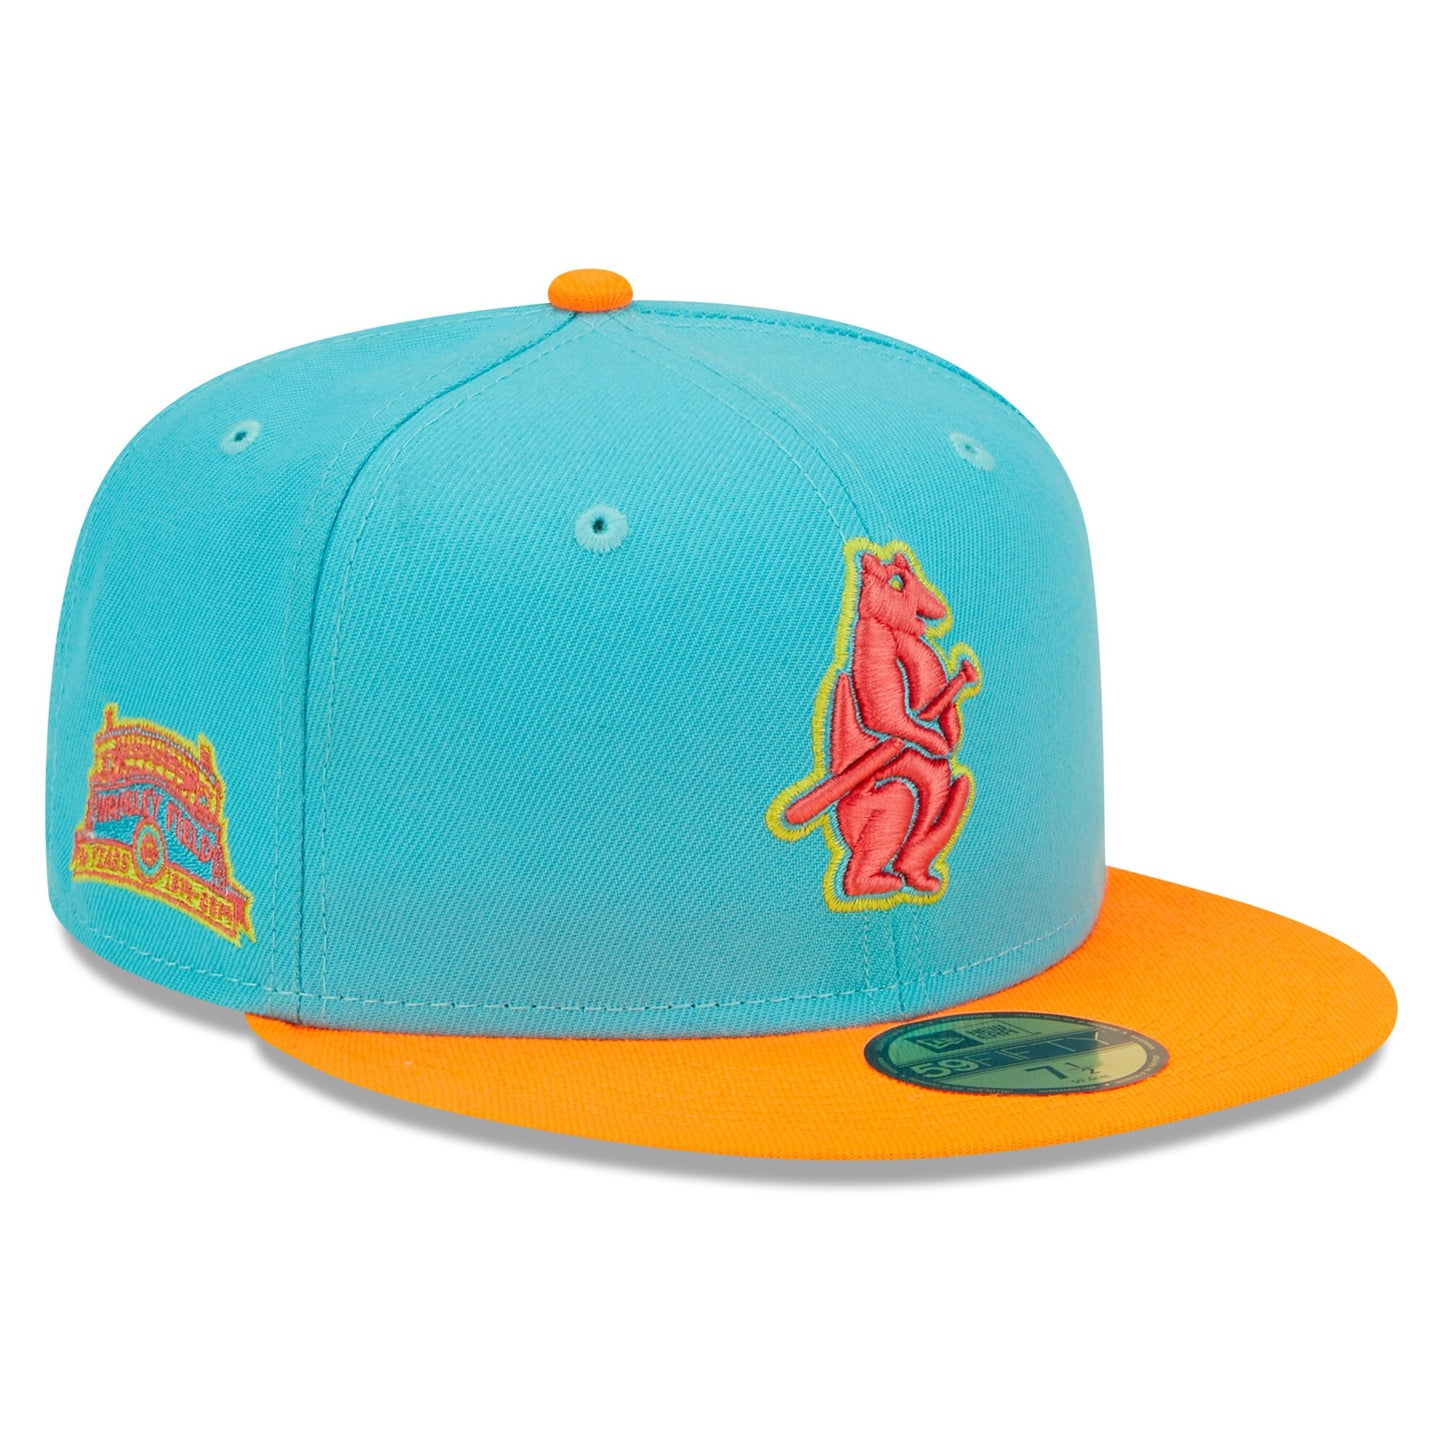 Chicago Cubs New Era Vice Highlighter 59FIFTY Fitted Hat - Blue/Orange